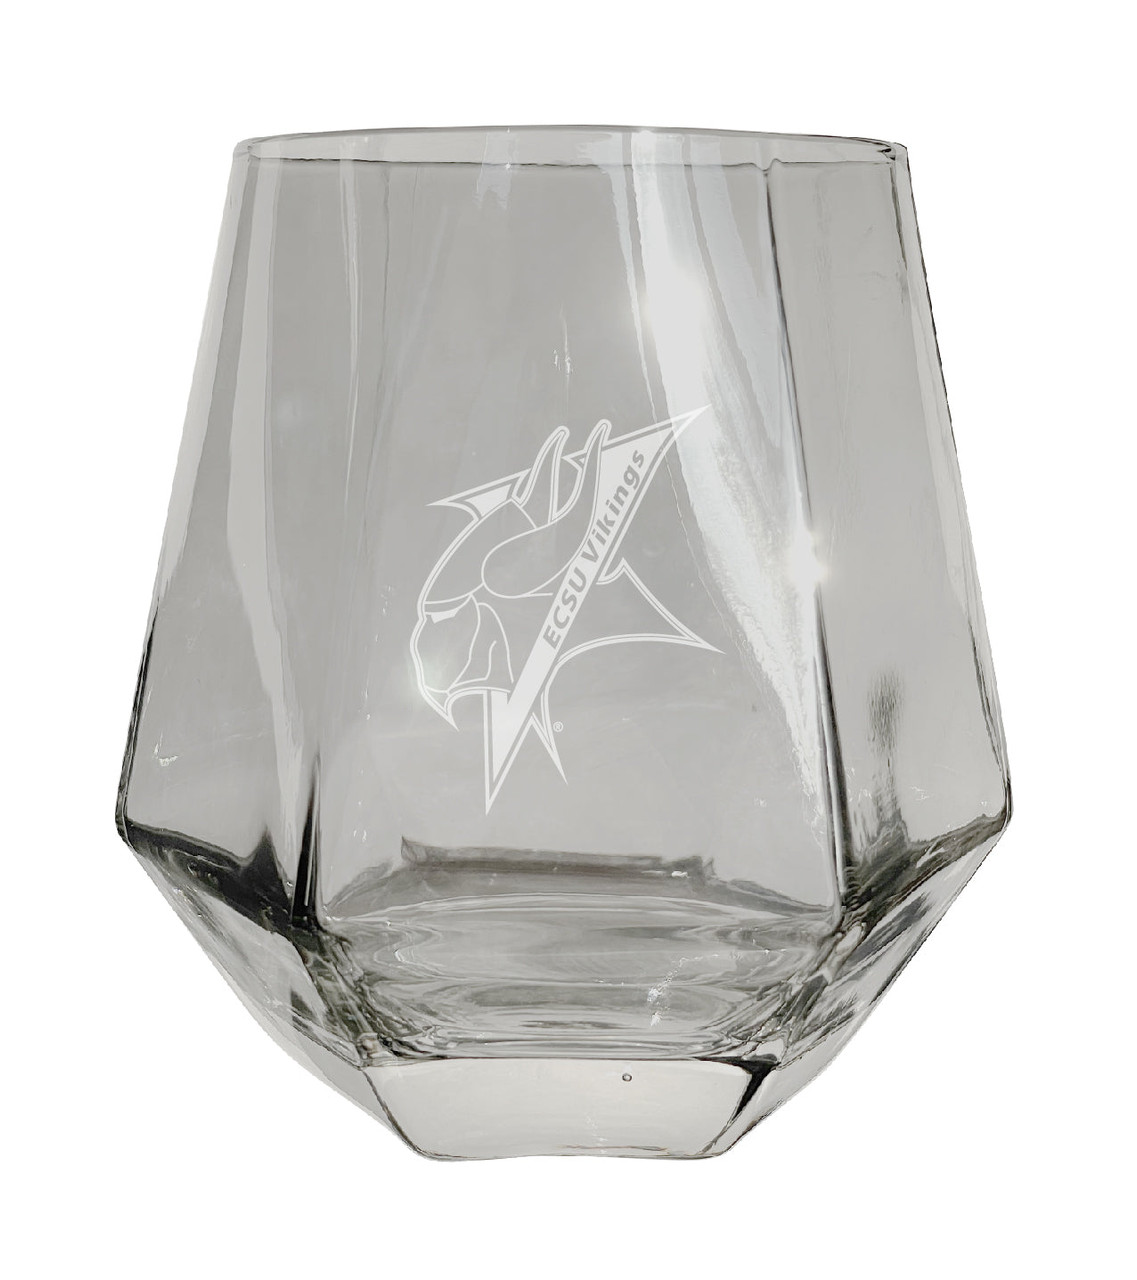 Elizabeth City State University Etched Diamond Cut Stemless 10 ounce Wine Glass Clear